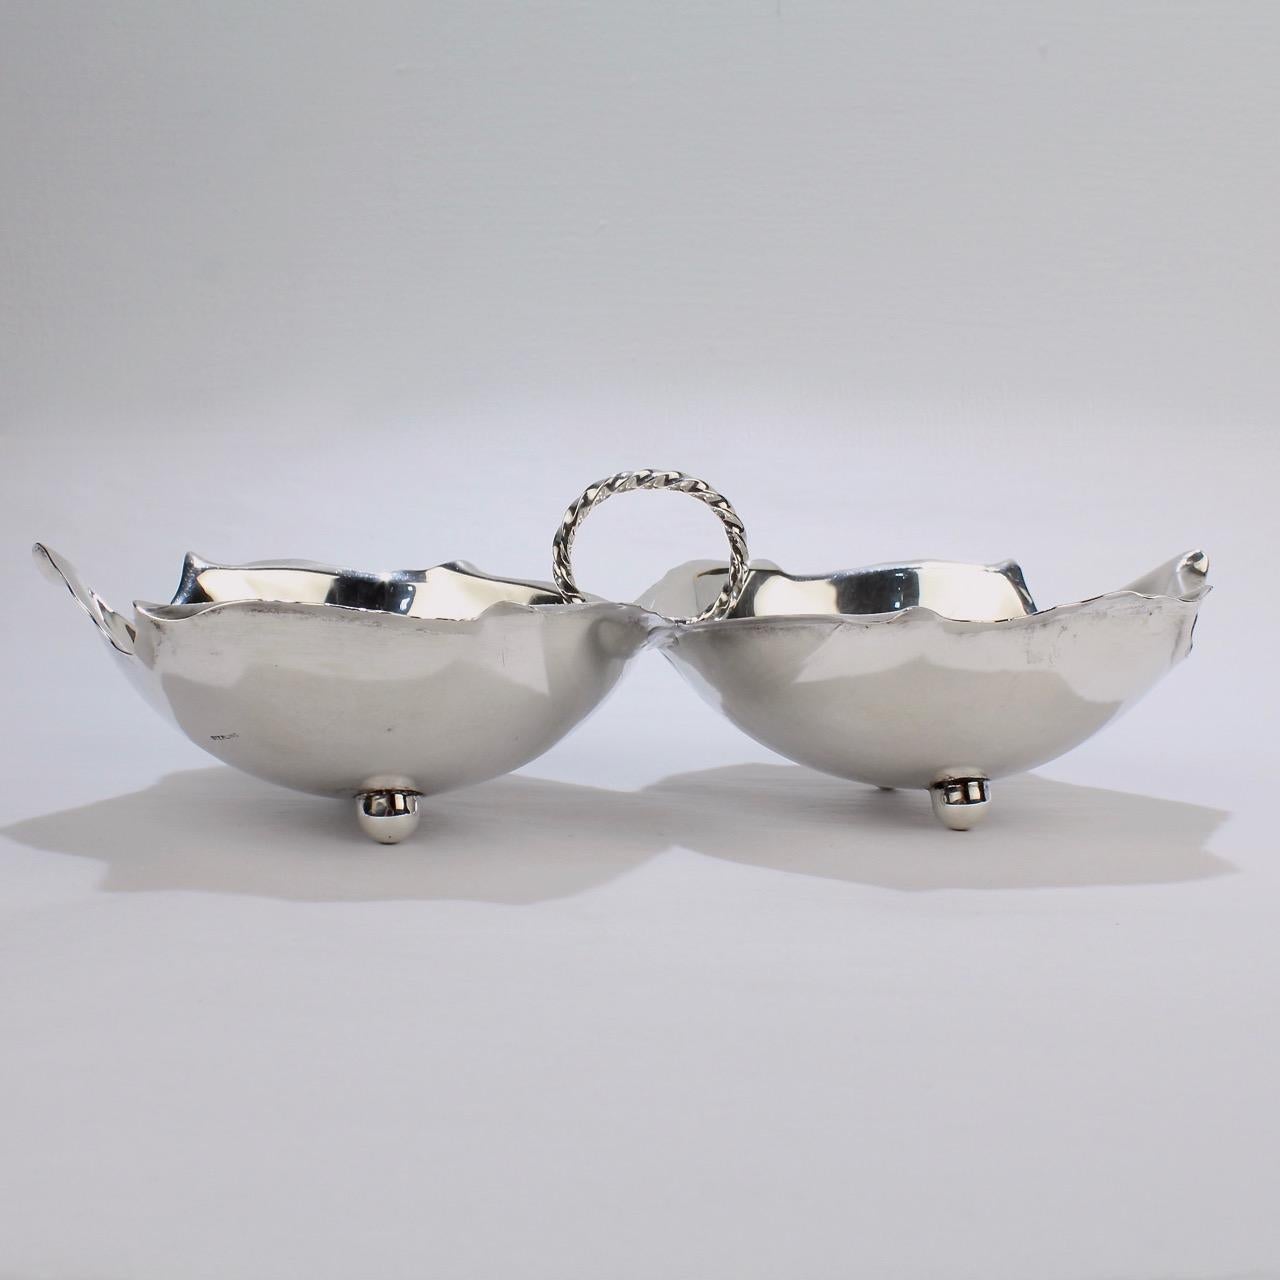 A terrific Alfredo Sciarrotta two-lobed sterling silver bowl.

Each side in the form of a leaf, with button feet, and joined by a wire twist handle.

Simply perfect for table top!

The base is marked Sterling, Handmade by Sciarrotta, the Bailey,